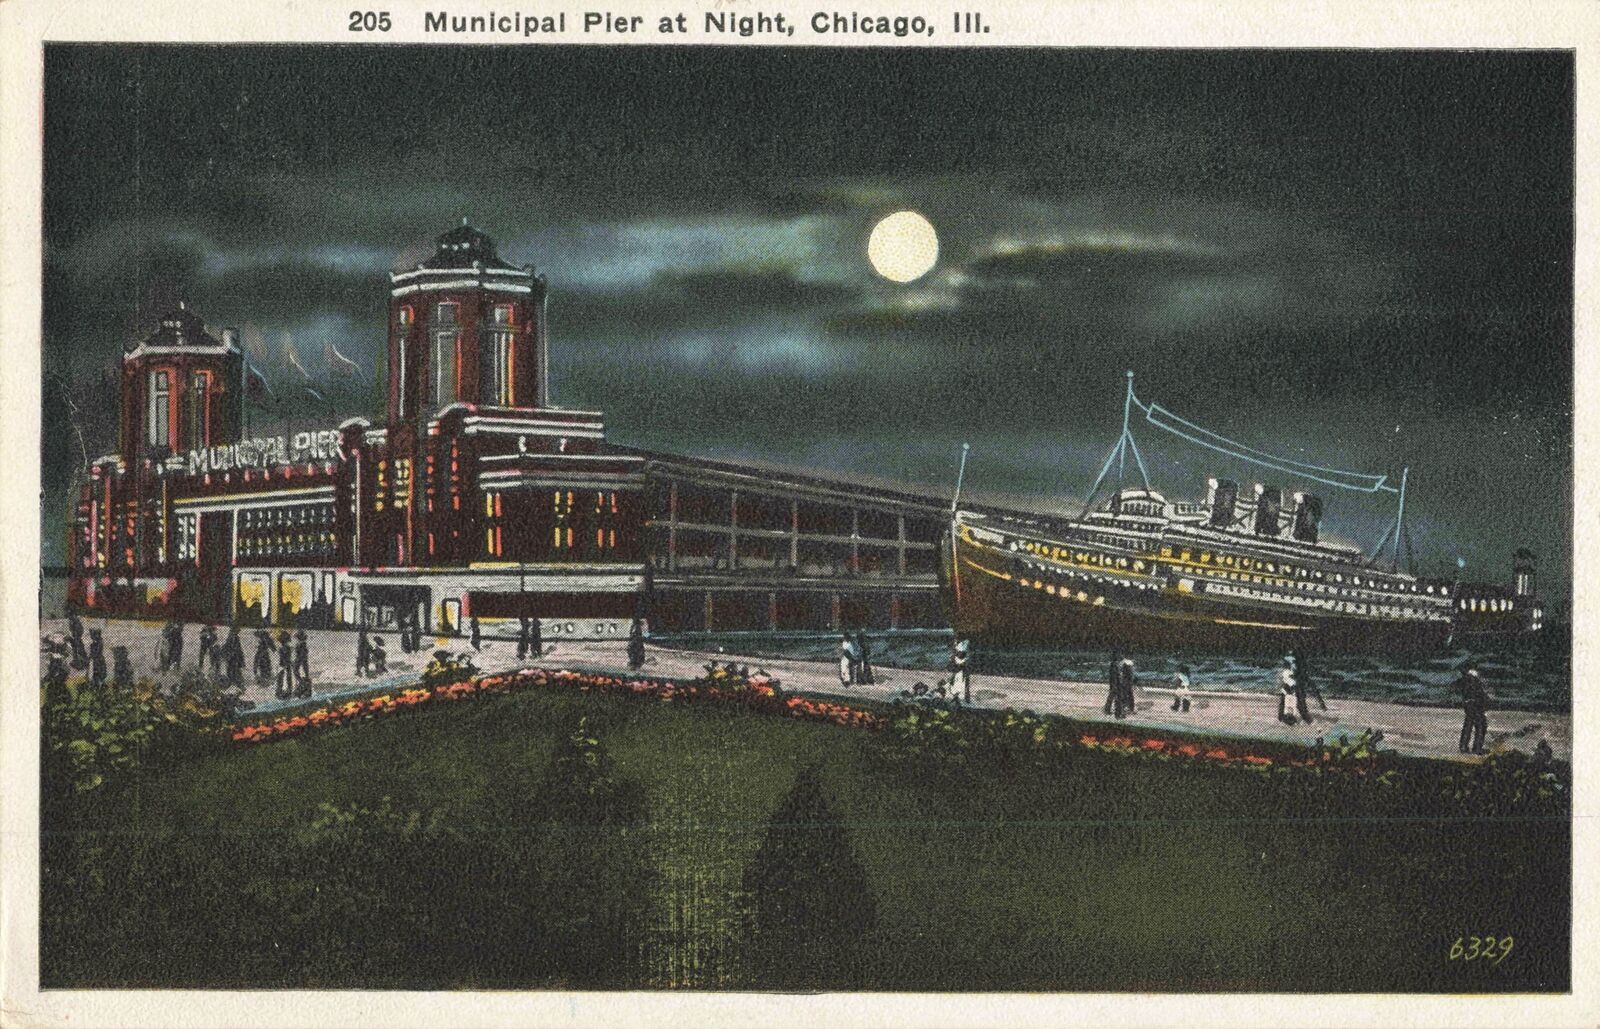 SHIP Chicago Pier IL Great MOONLIT View Steamer Excursion Ferry Docks @ the Pier